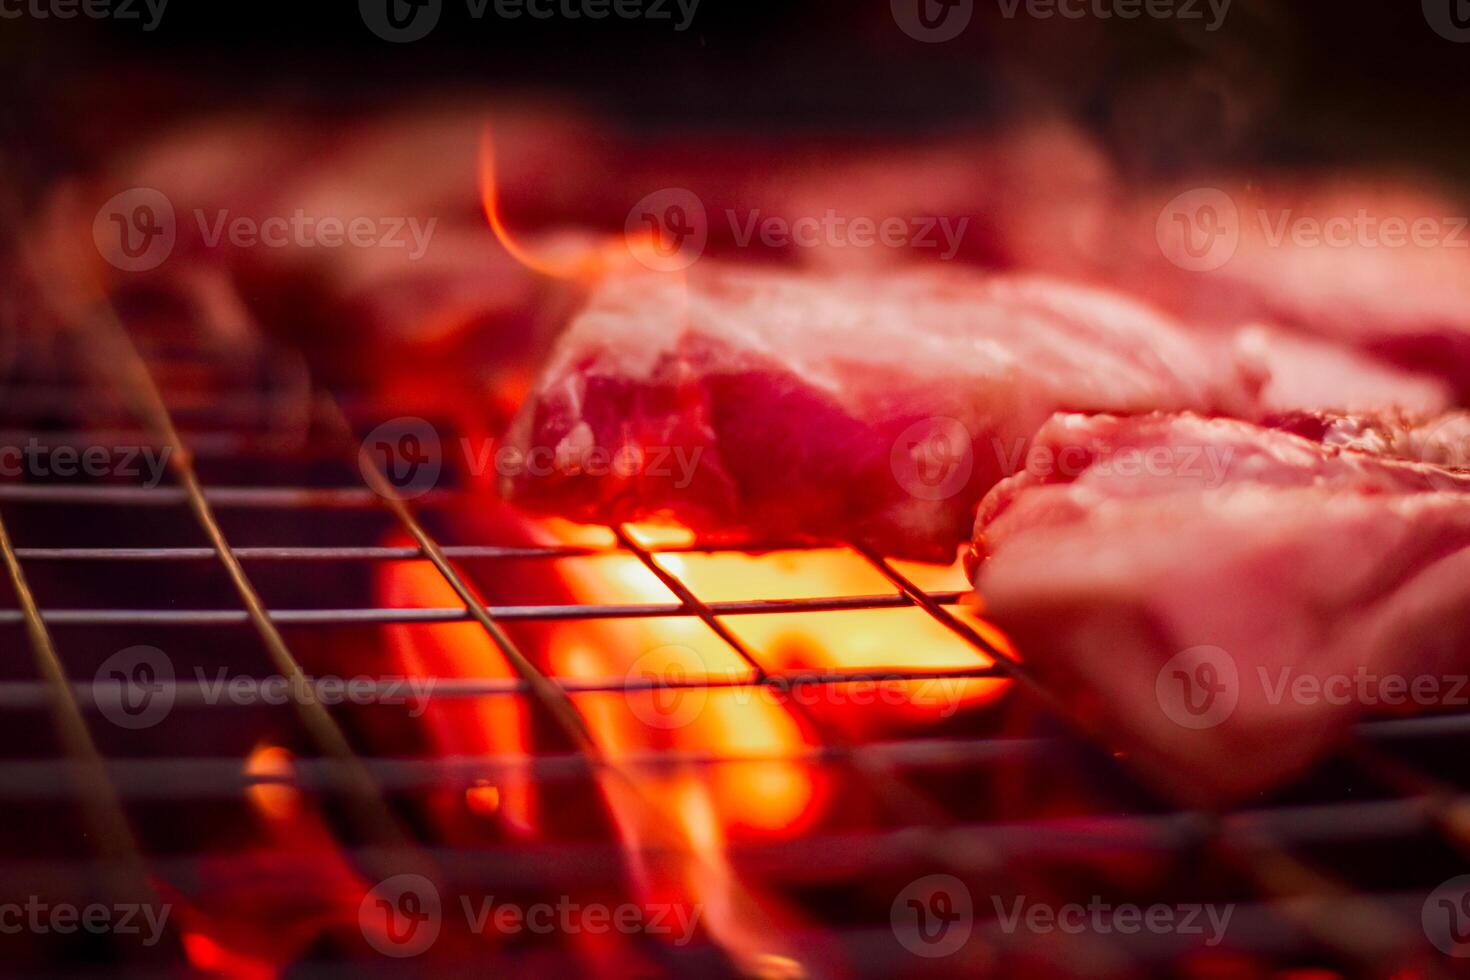 Grilling pork on stainless steel grill with flames on black background, food and cuisine concept. Burning pork on a charcoal grill. photo